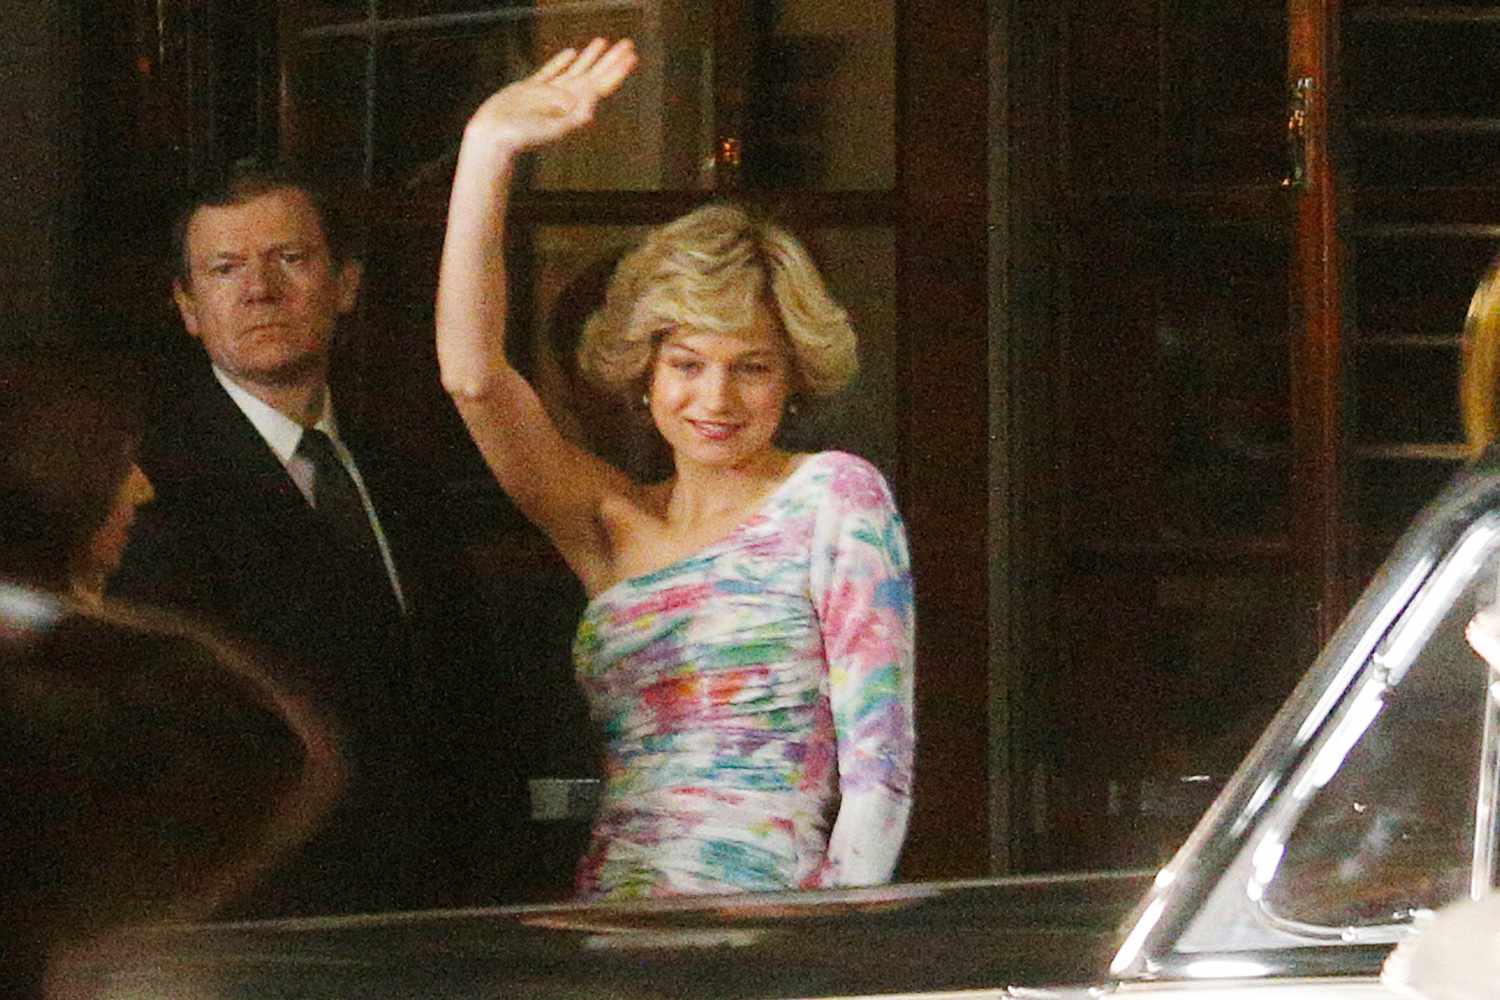 Emma Corrin recreates Princess Diana&rsquo;s arrival at the Bernado&rsquo;s Champion Awards arrival at the Savoy Hotel while the paparazzi take her picture for the hit Netflix show &lsquo;The Crown&rsquo; in London, England